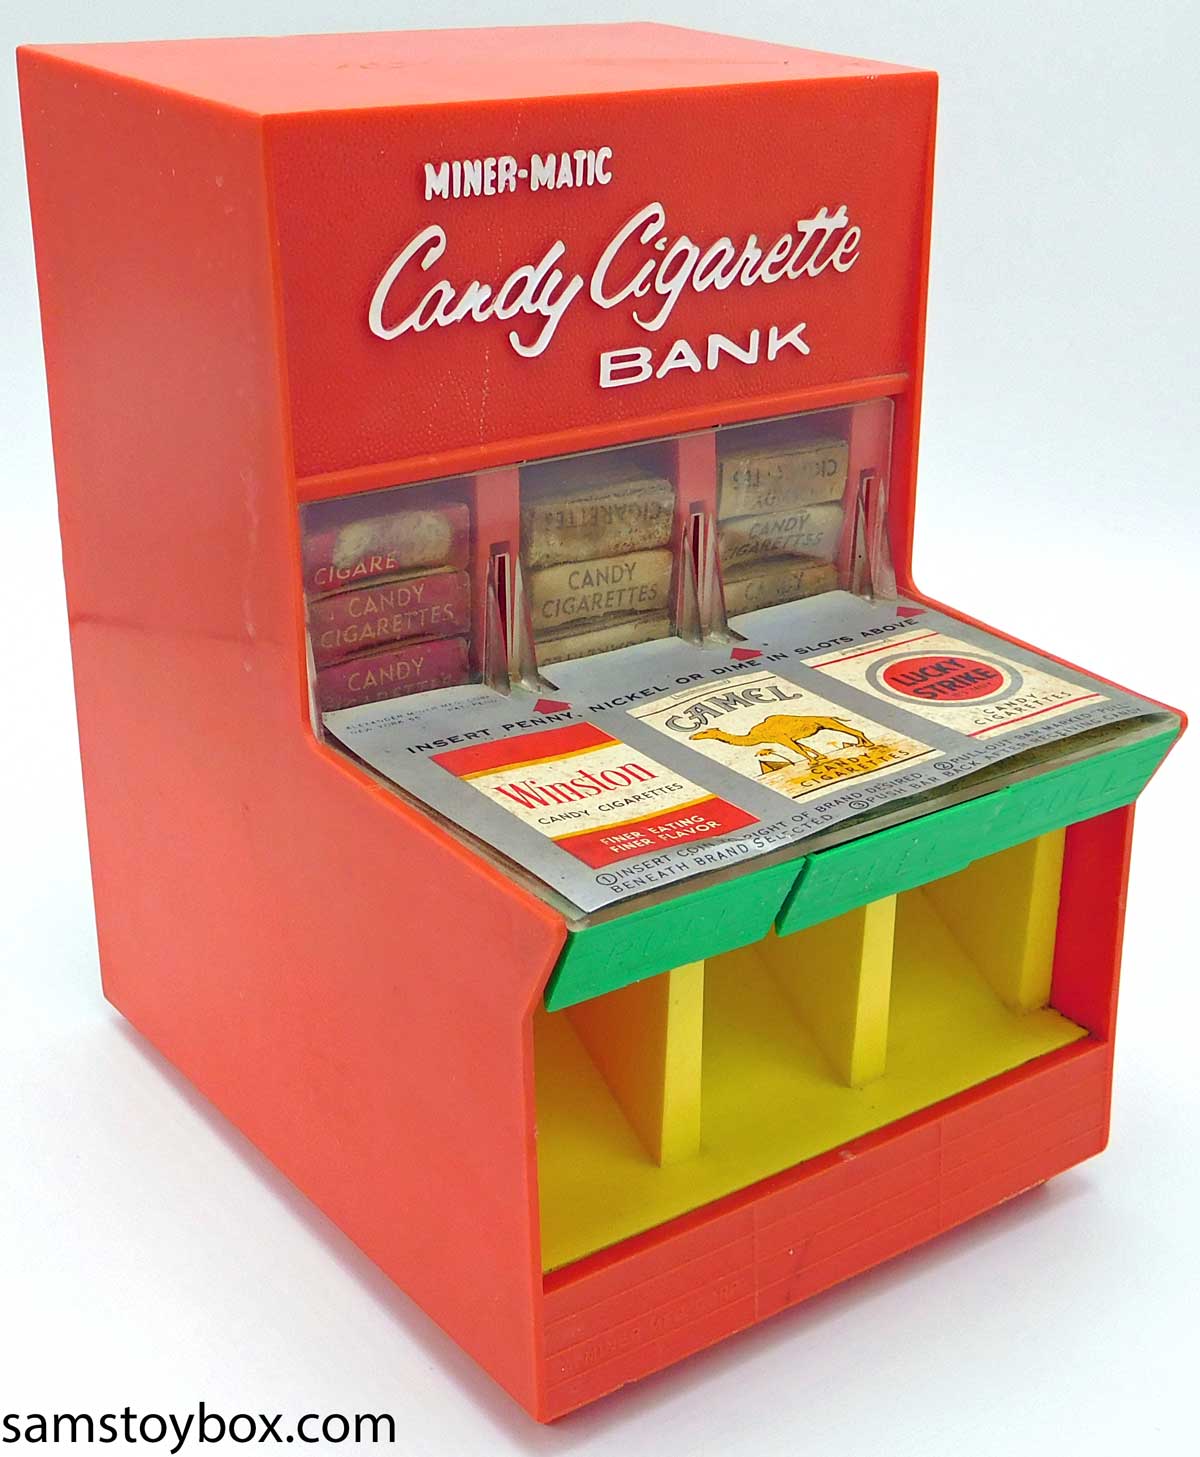 Miner-Matic Candy Cigarette Bank Box in Red